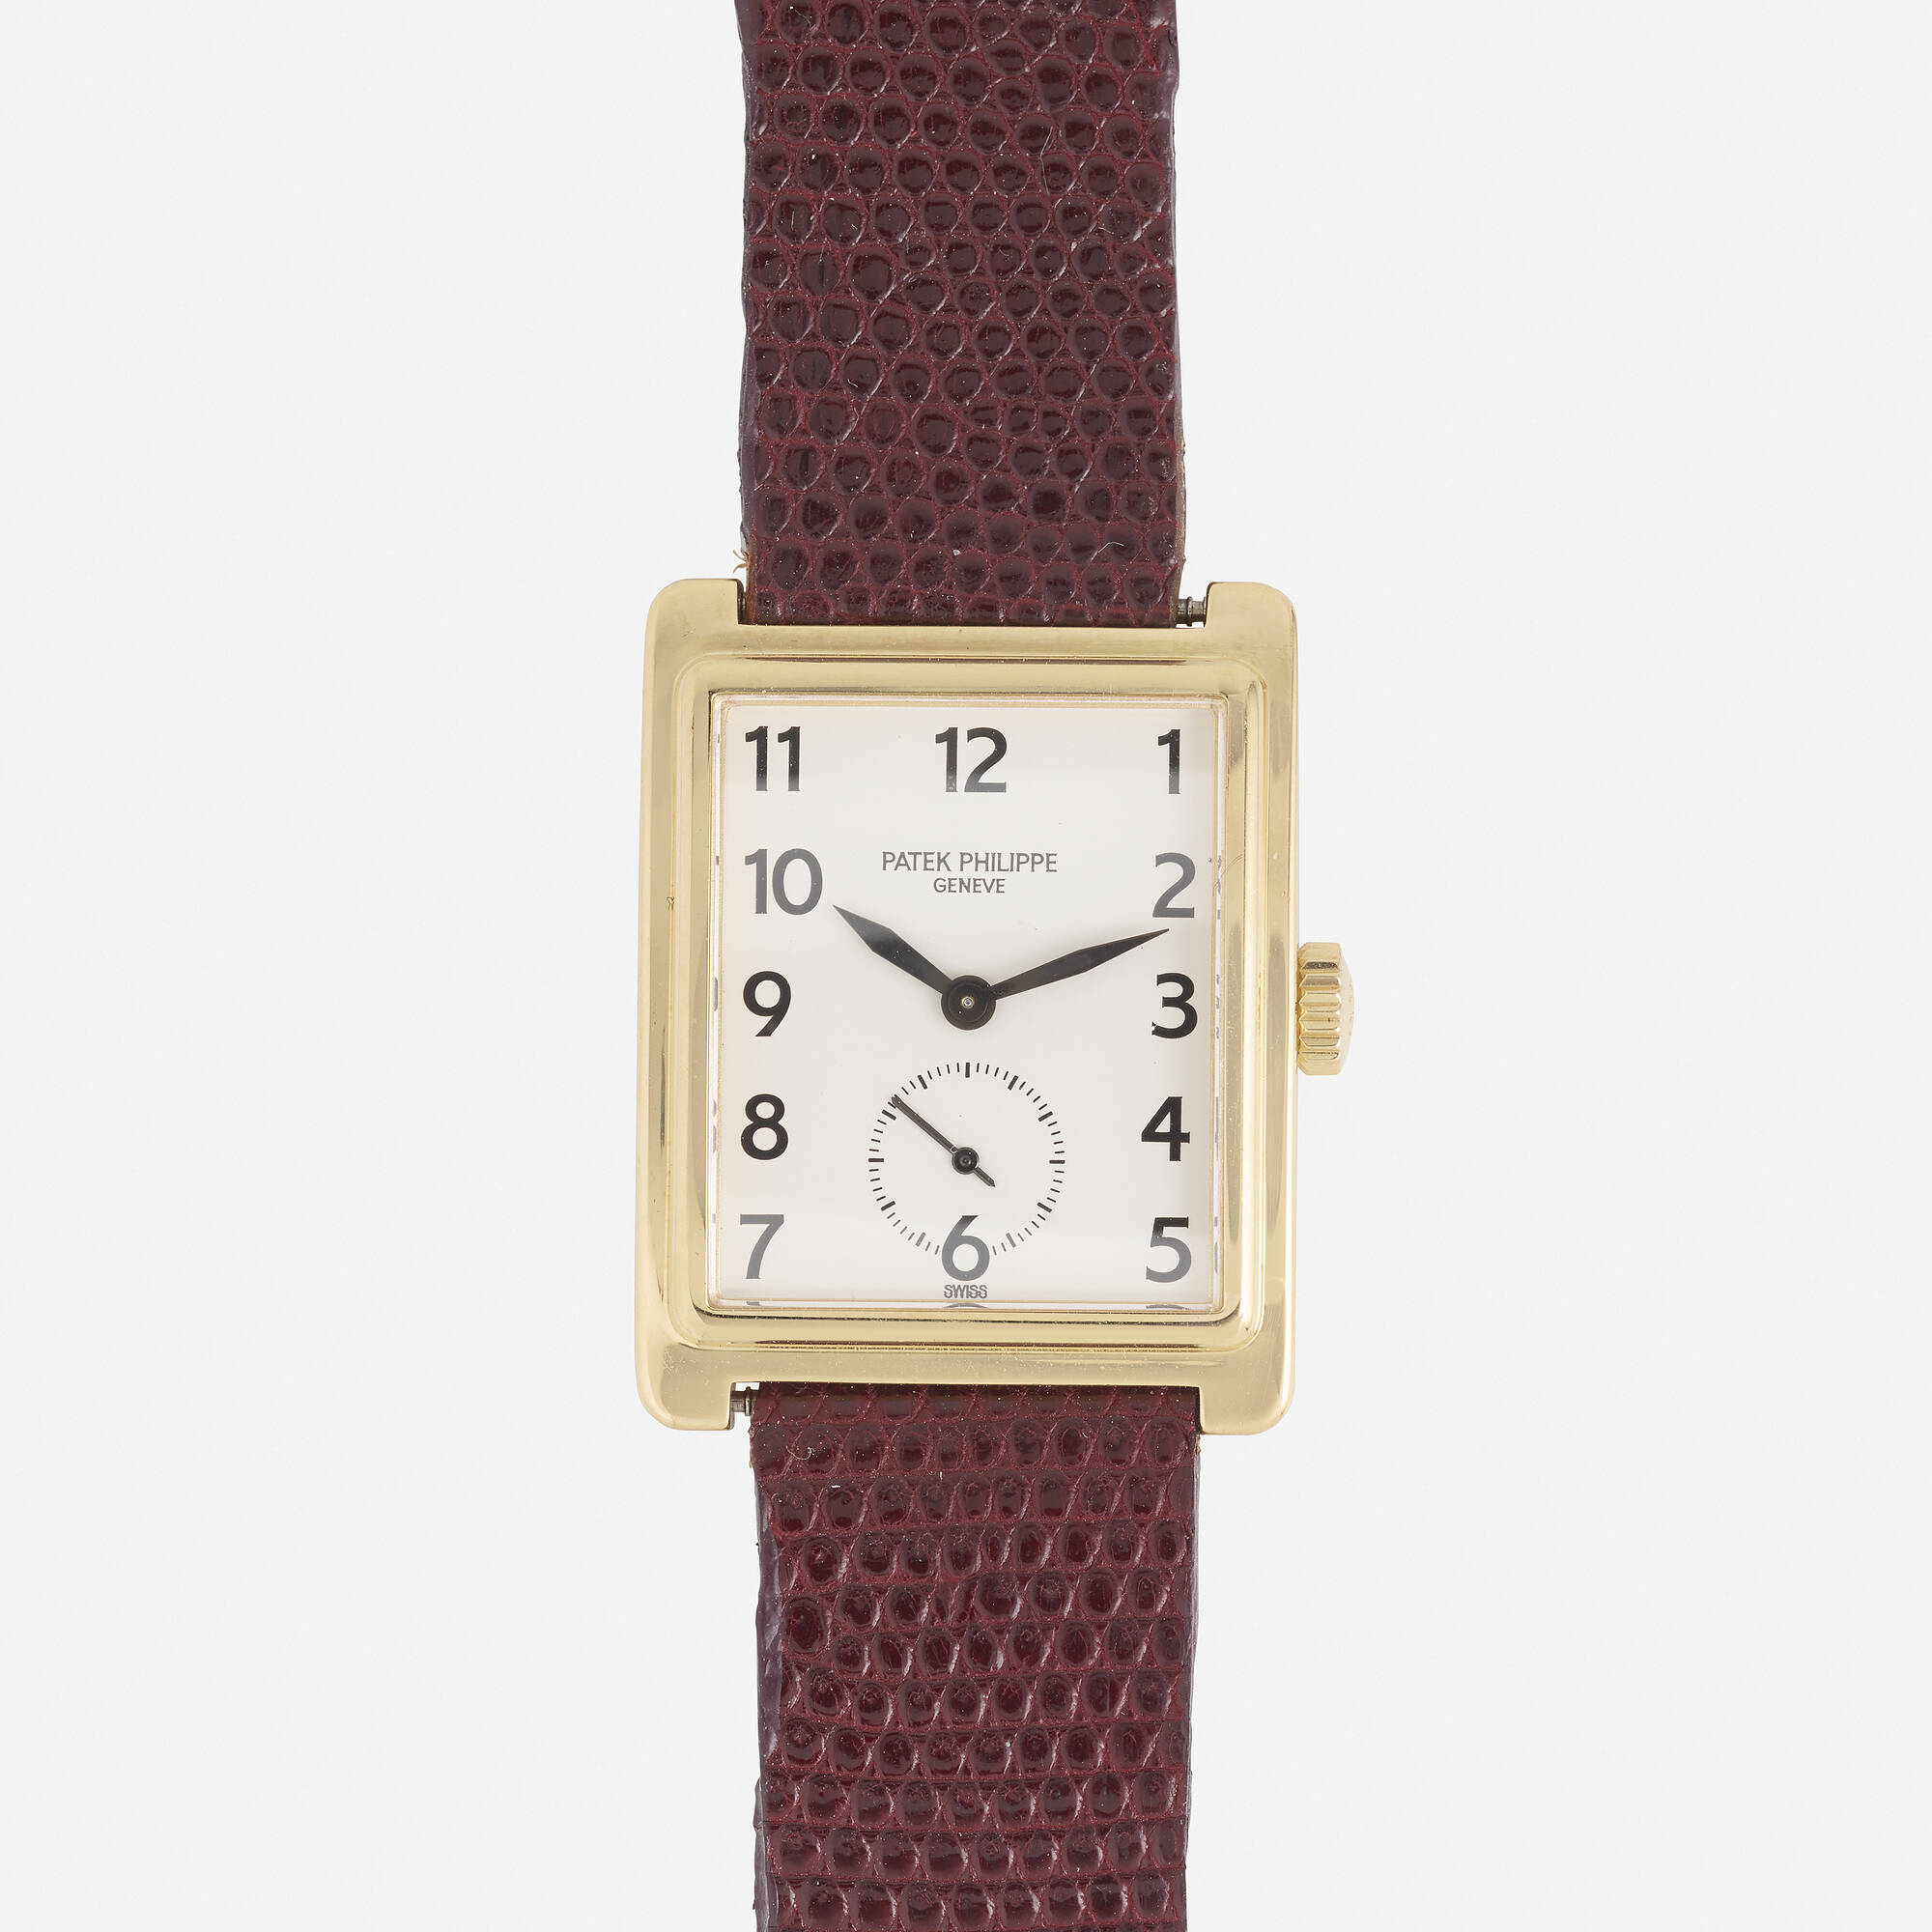 Sold at Auction: PATEK PHILIPPE, PATEK PHILIPPE A burgundy leather